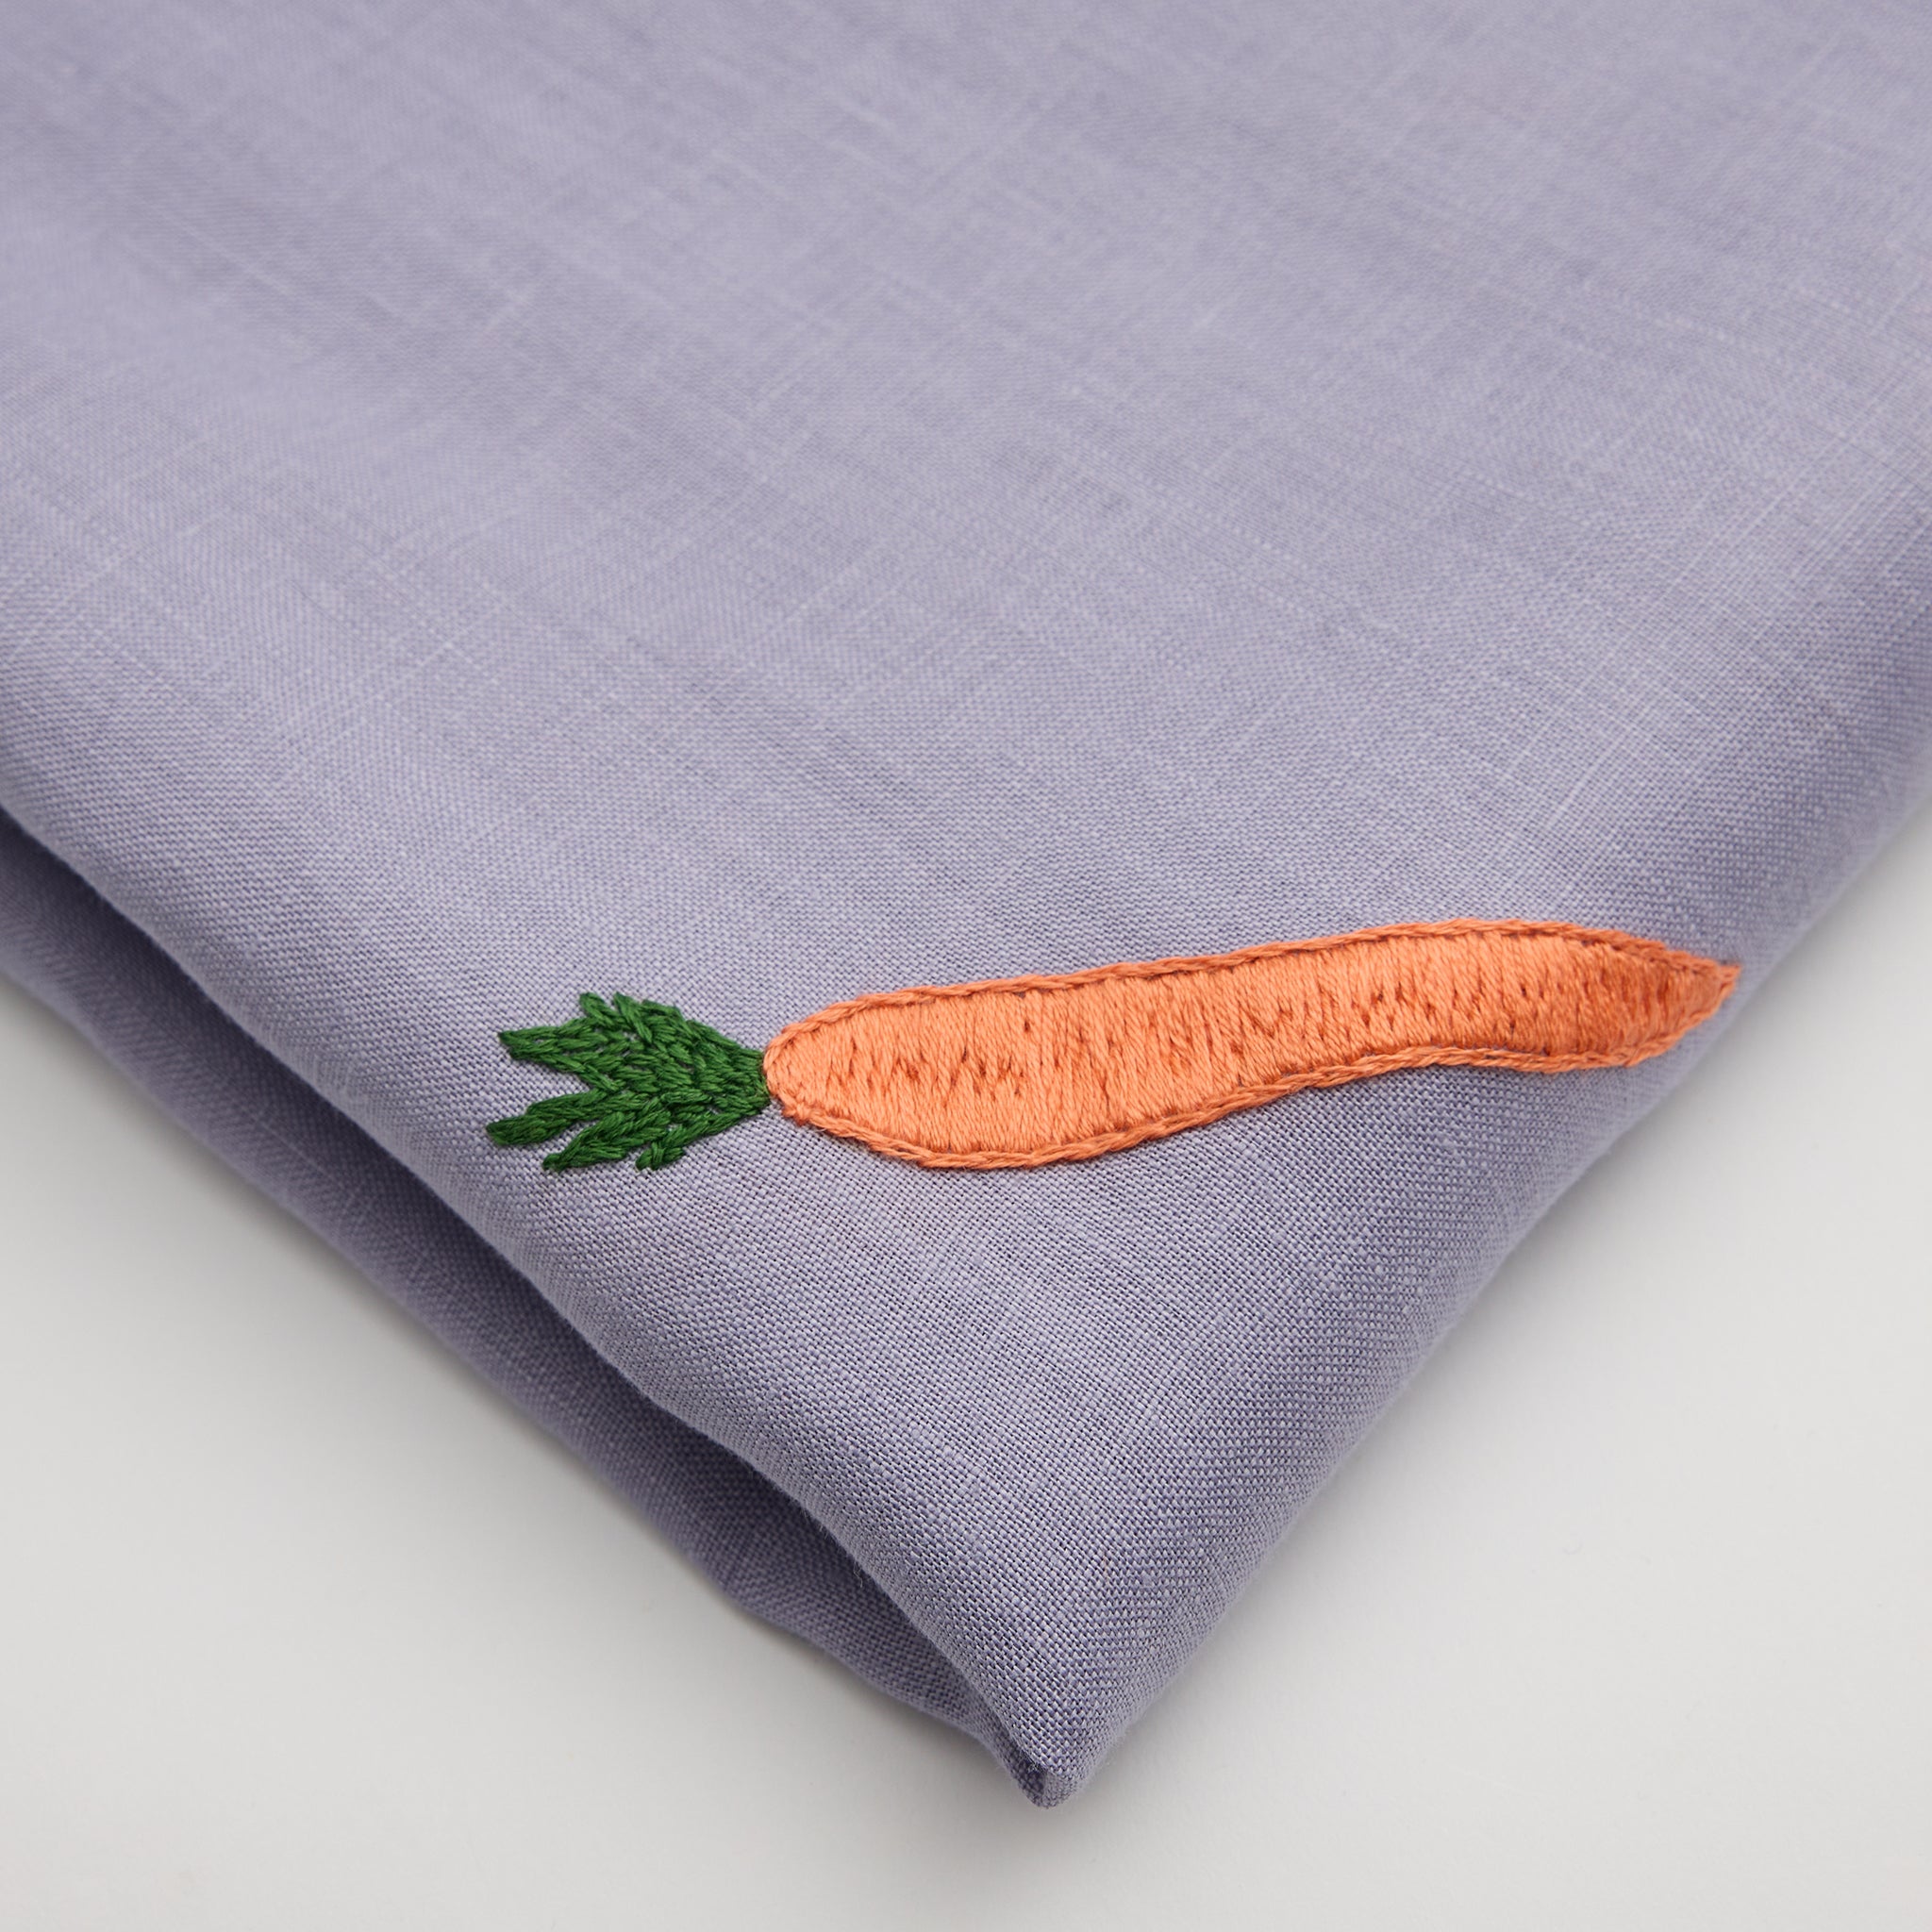 Tablecloth No. 19, hand-embroidered with heirloom carrots